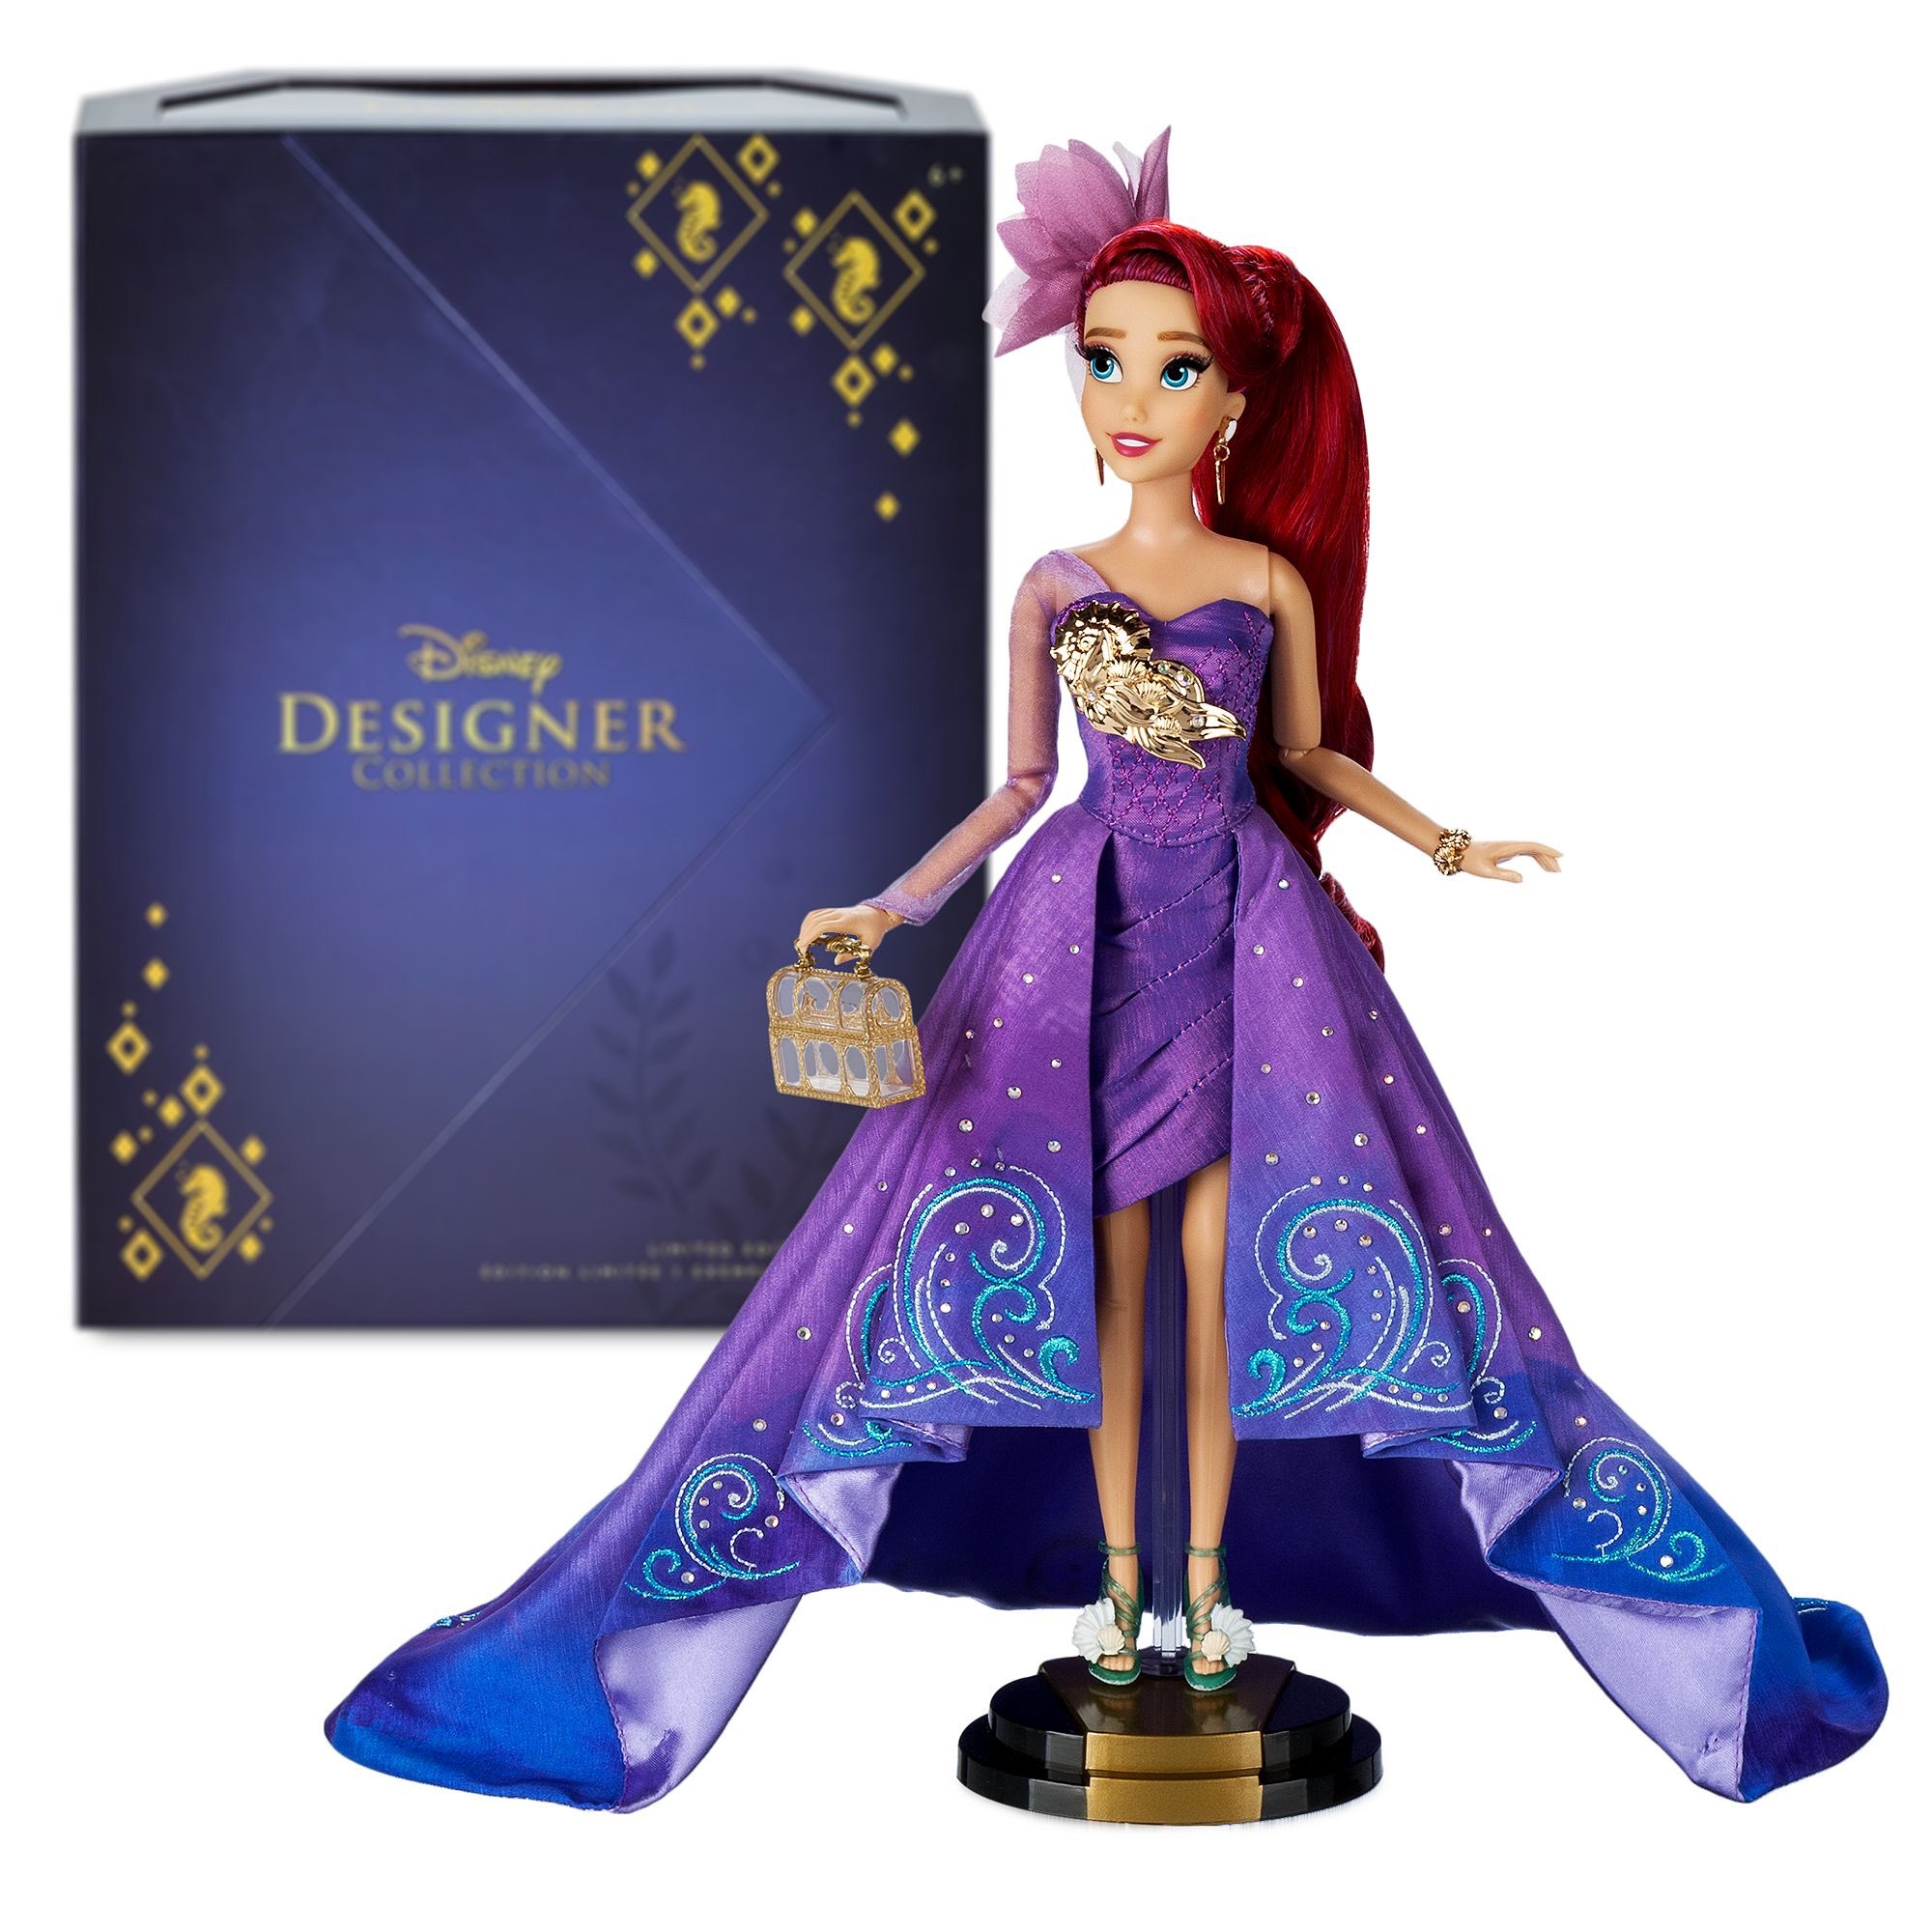 15 new Disney Store Collection Limited Edition Dolls 2021 - 2022 Princess Celebration - YouLoveIt.com